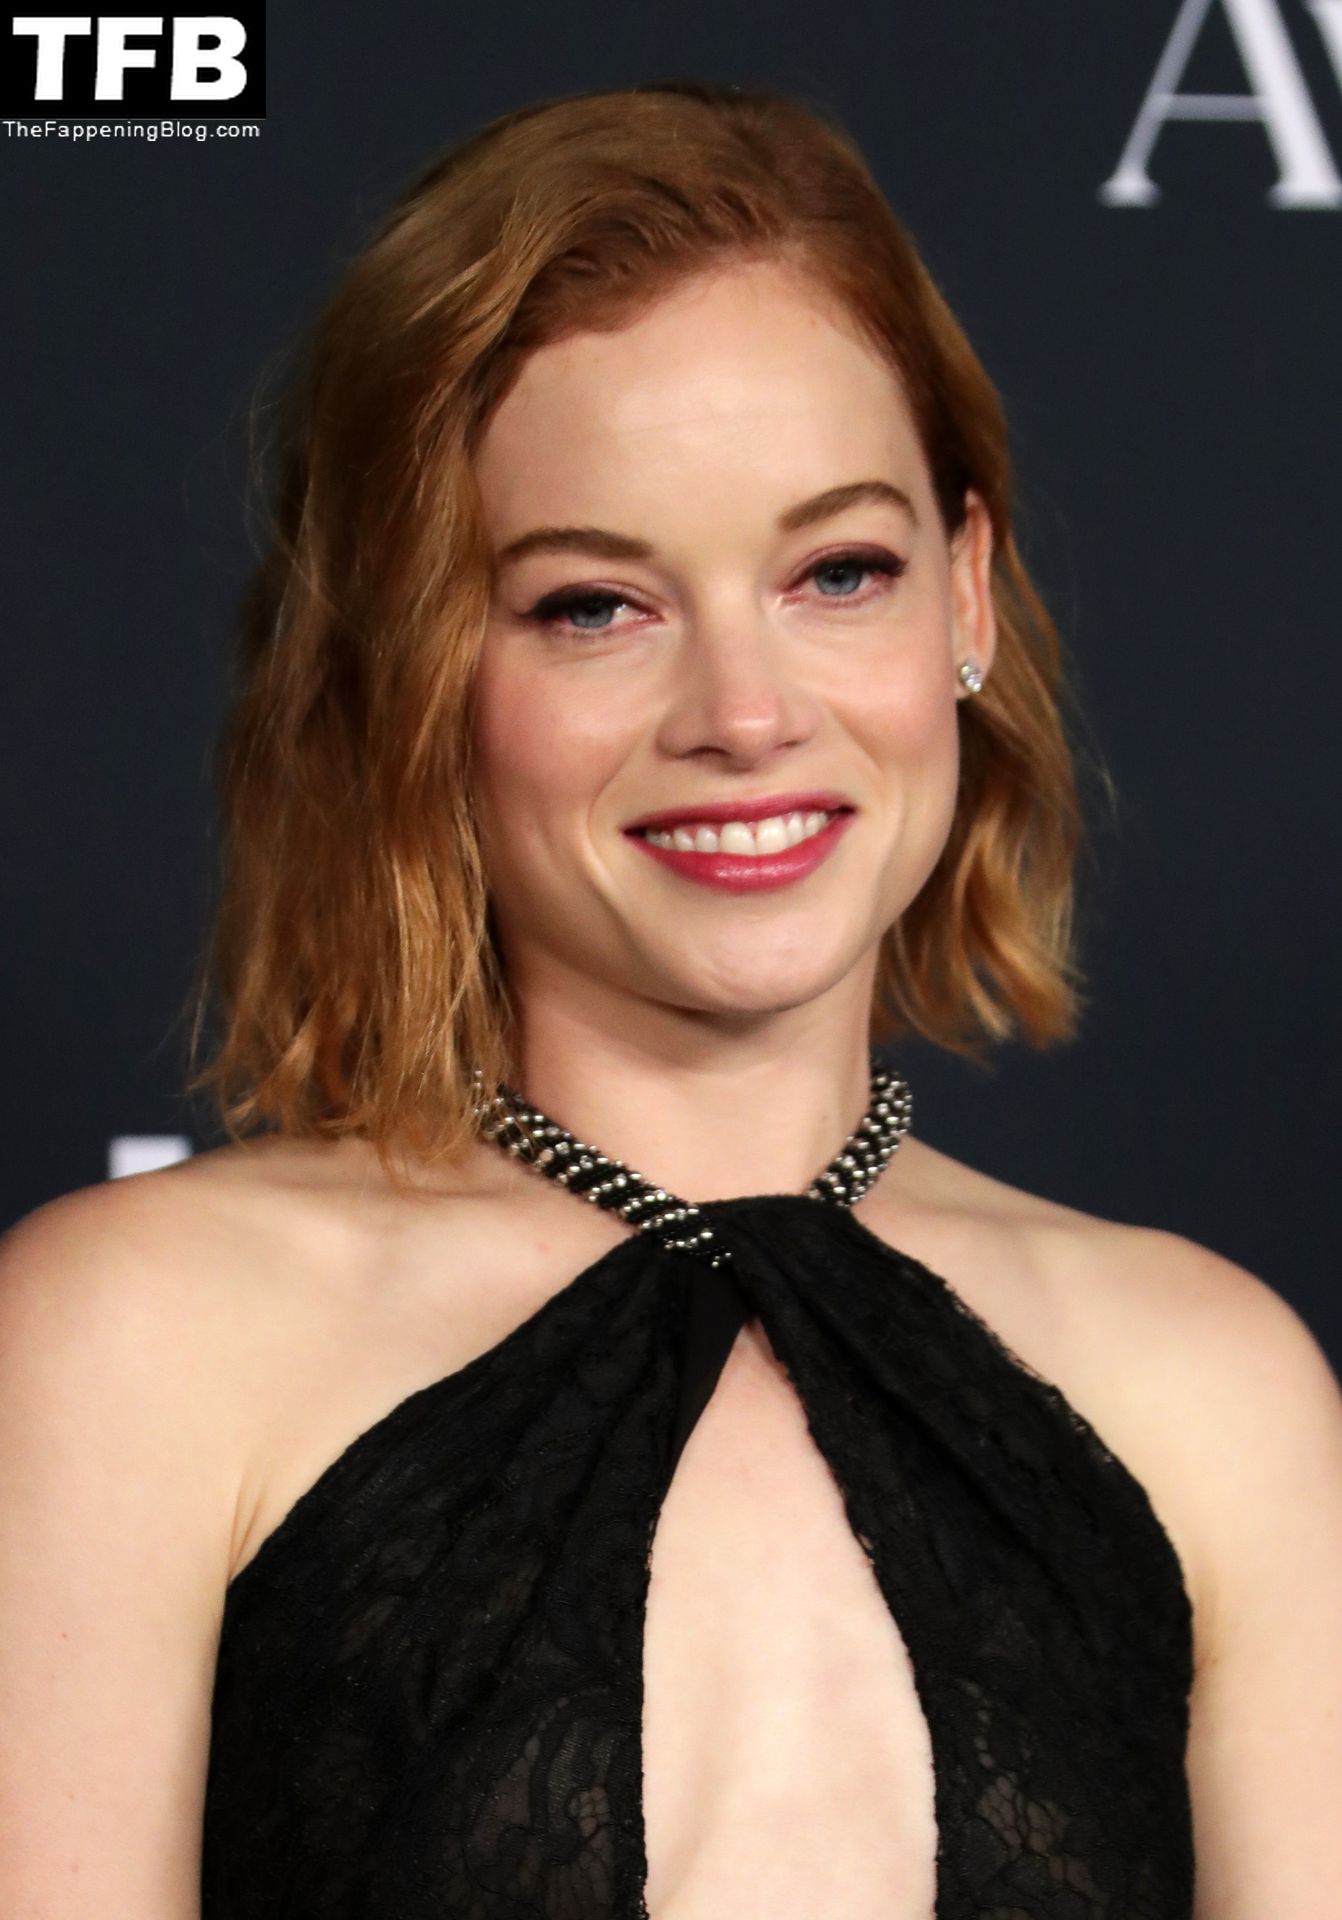 Jane-Levy-See-Through-The-Fappening-Blog-7.jpg